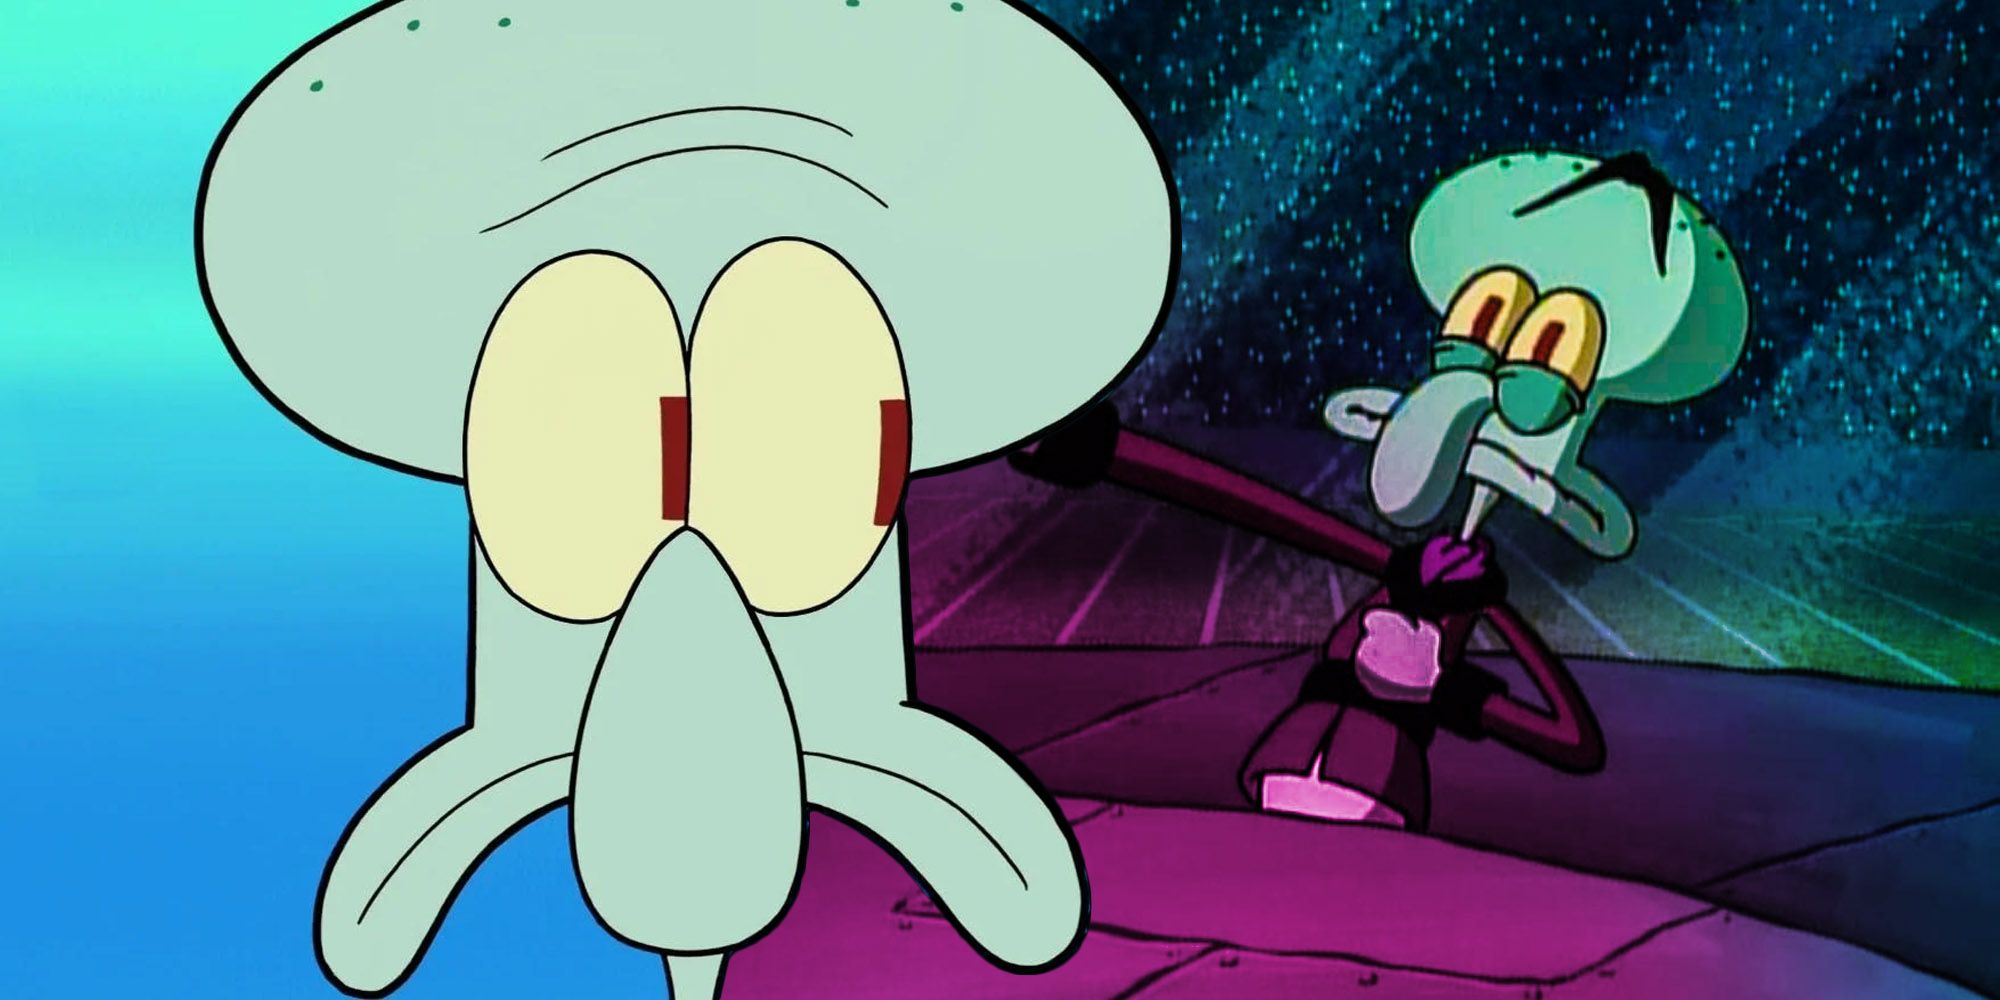 ...and one of the most notable ones is that between Squidward and Squilliam, and SpongeBob’s ...